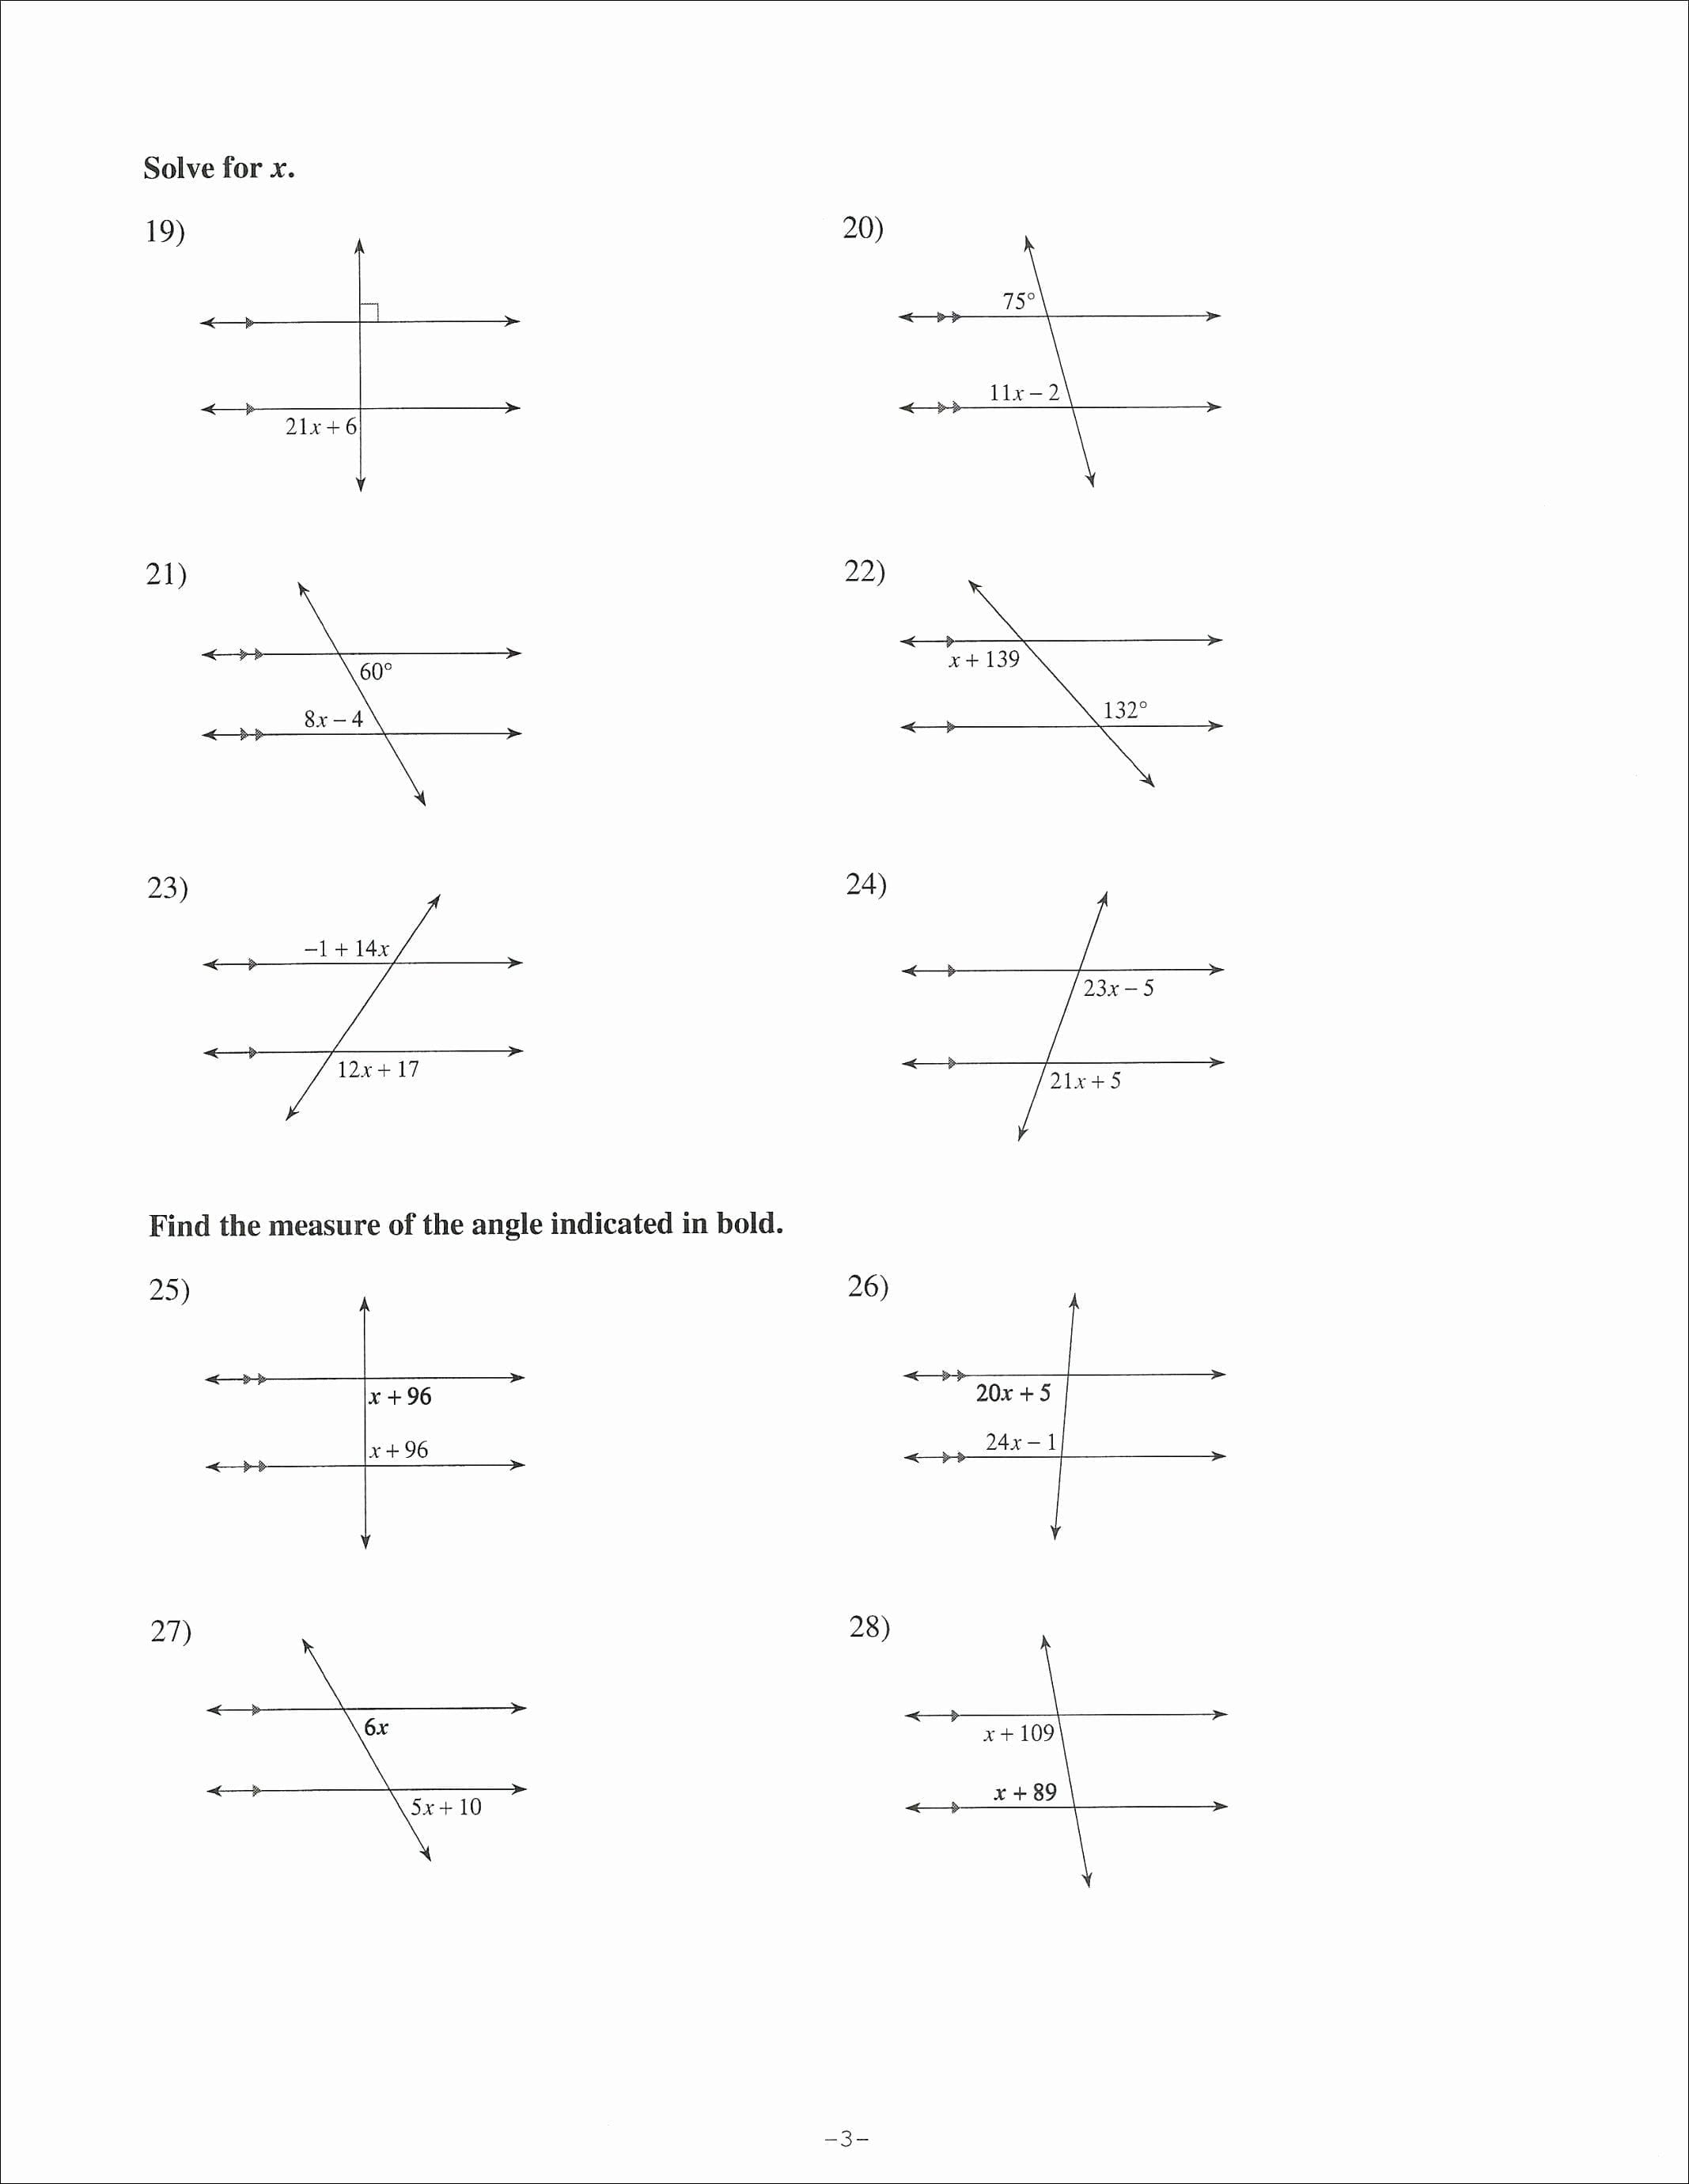 30 Angles Formedparallel Lines Cuta Transversal As Well As Geometry Parallel Lines And Transversals Worksheet Answers